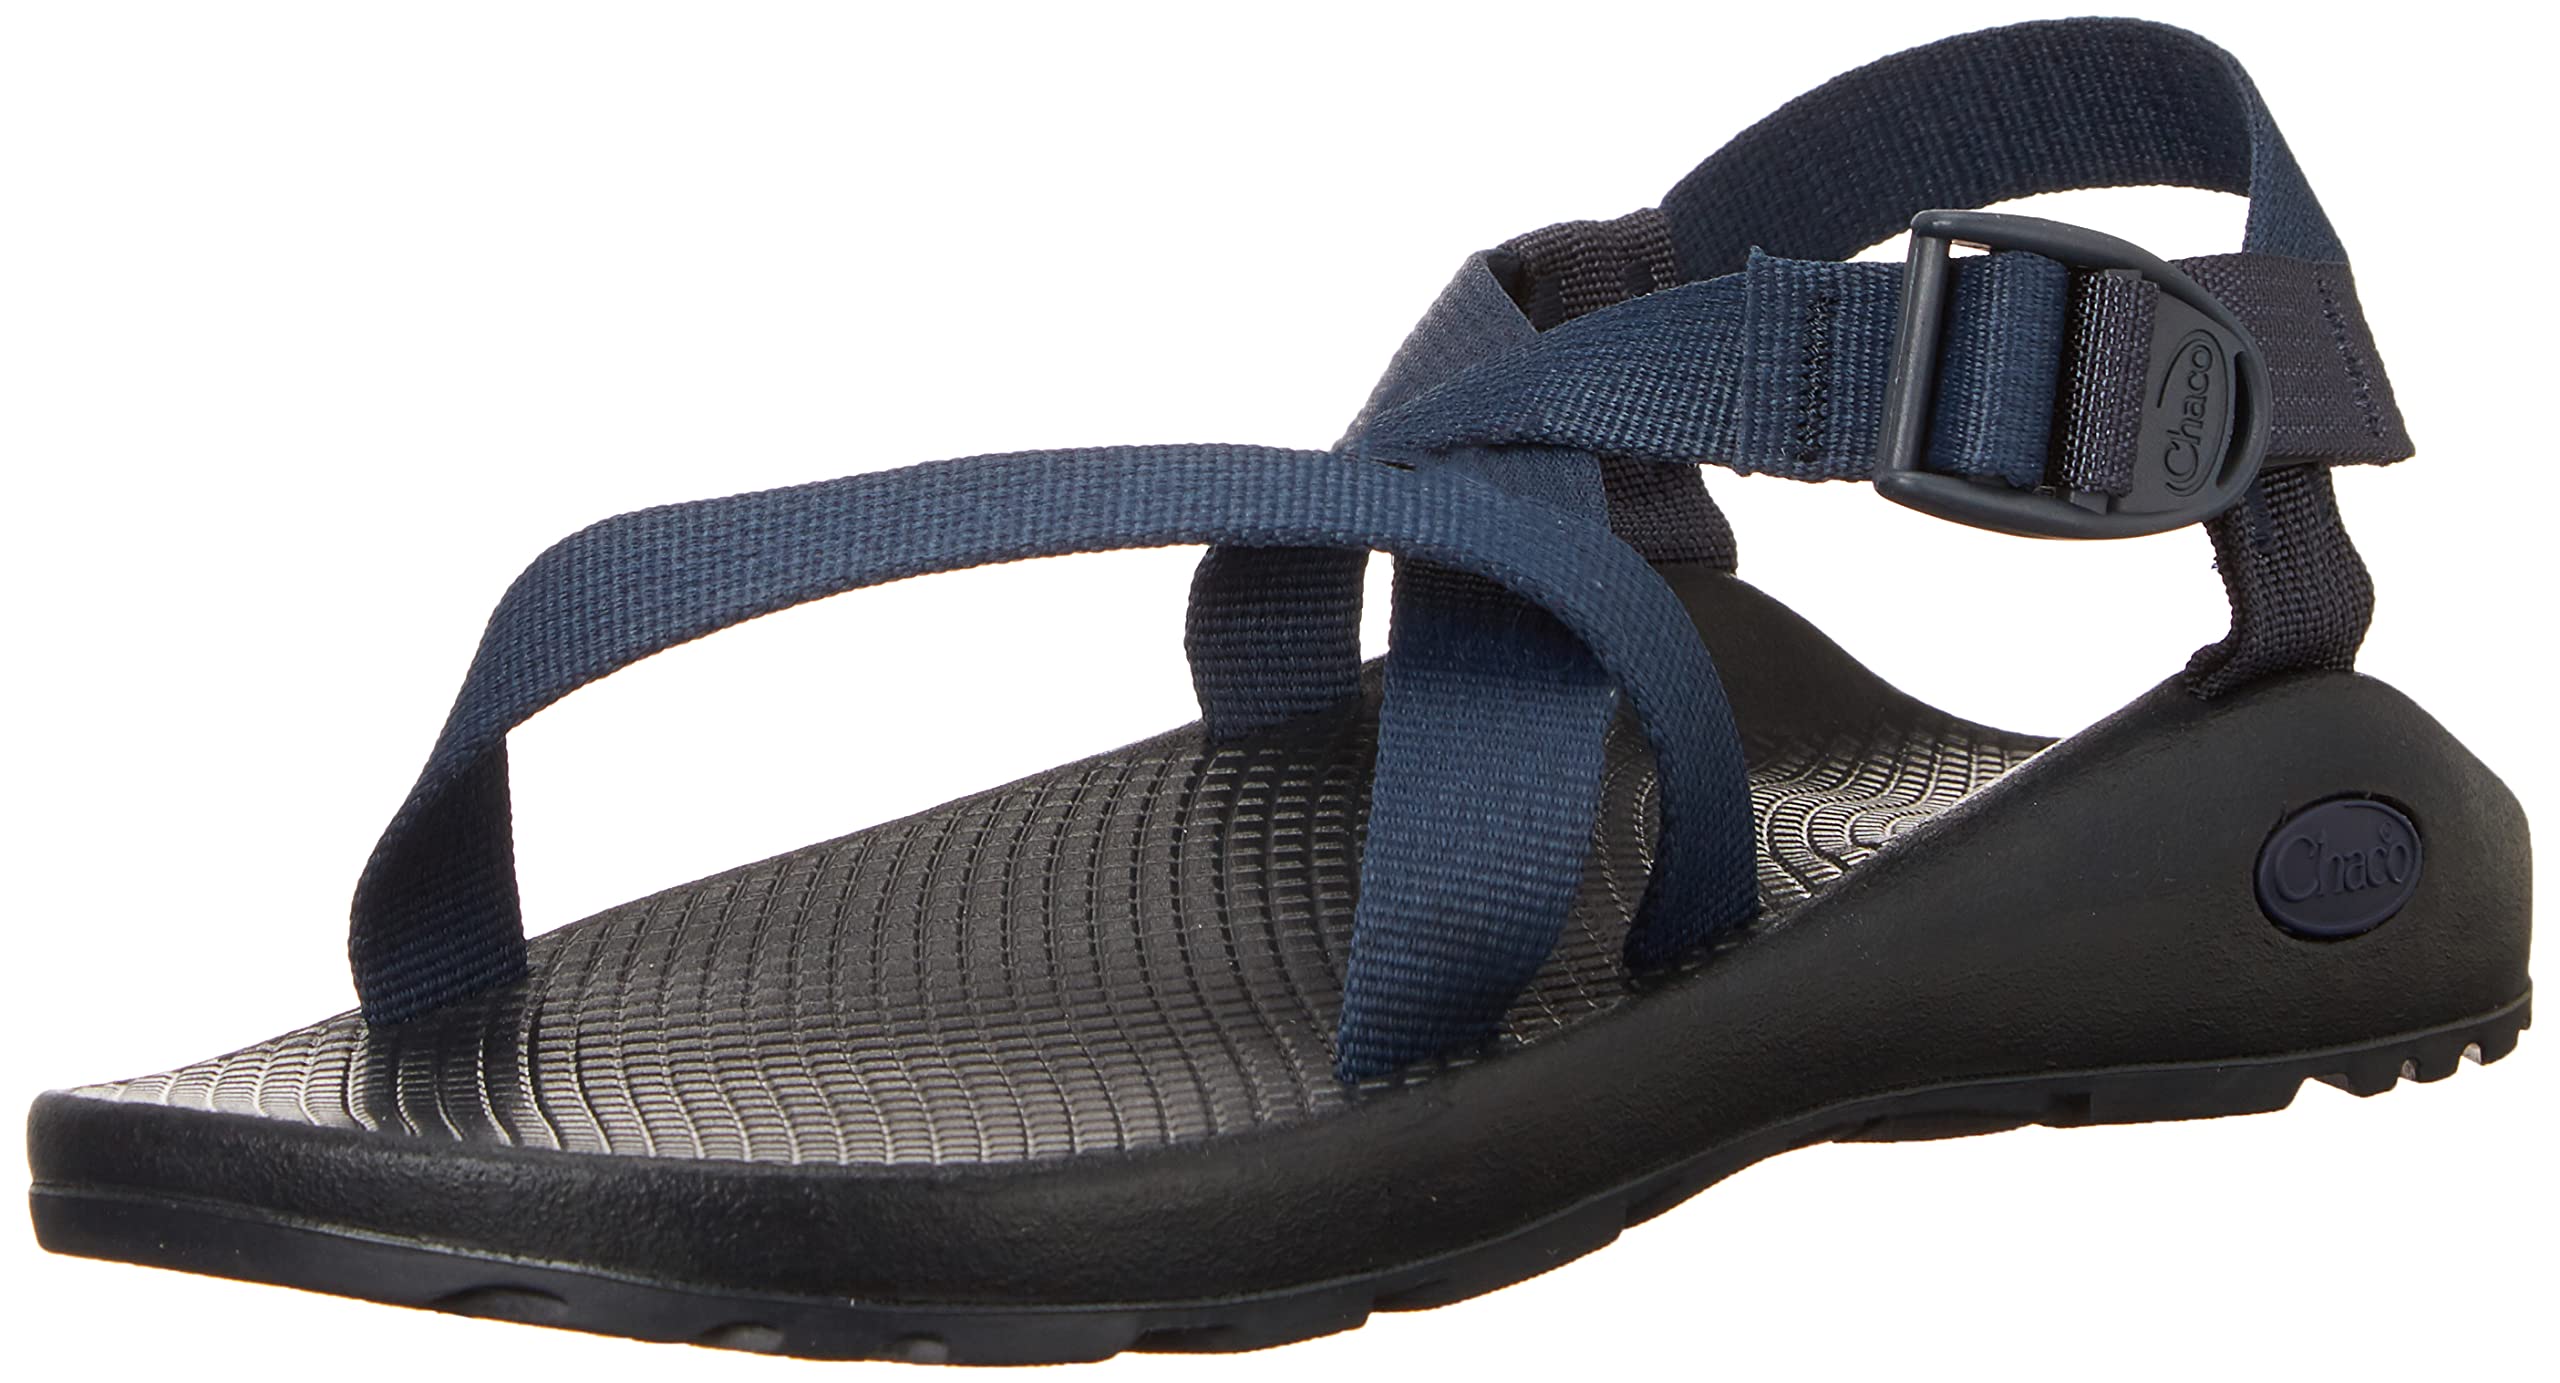 Chaco Womens Z/1 Classic Sandals - Navy - 9